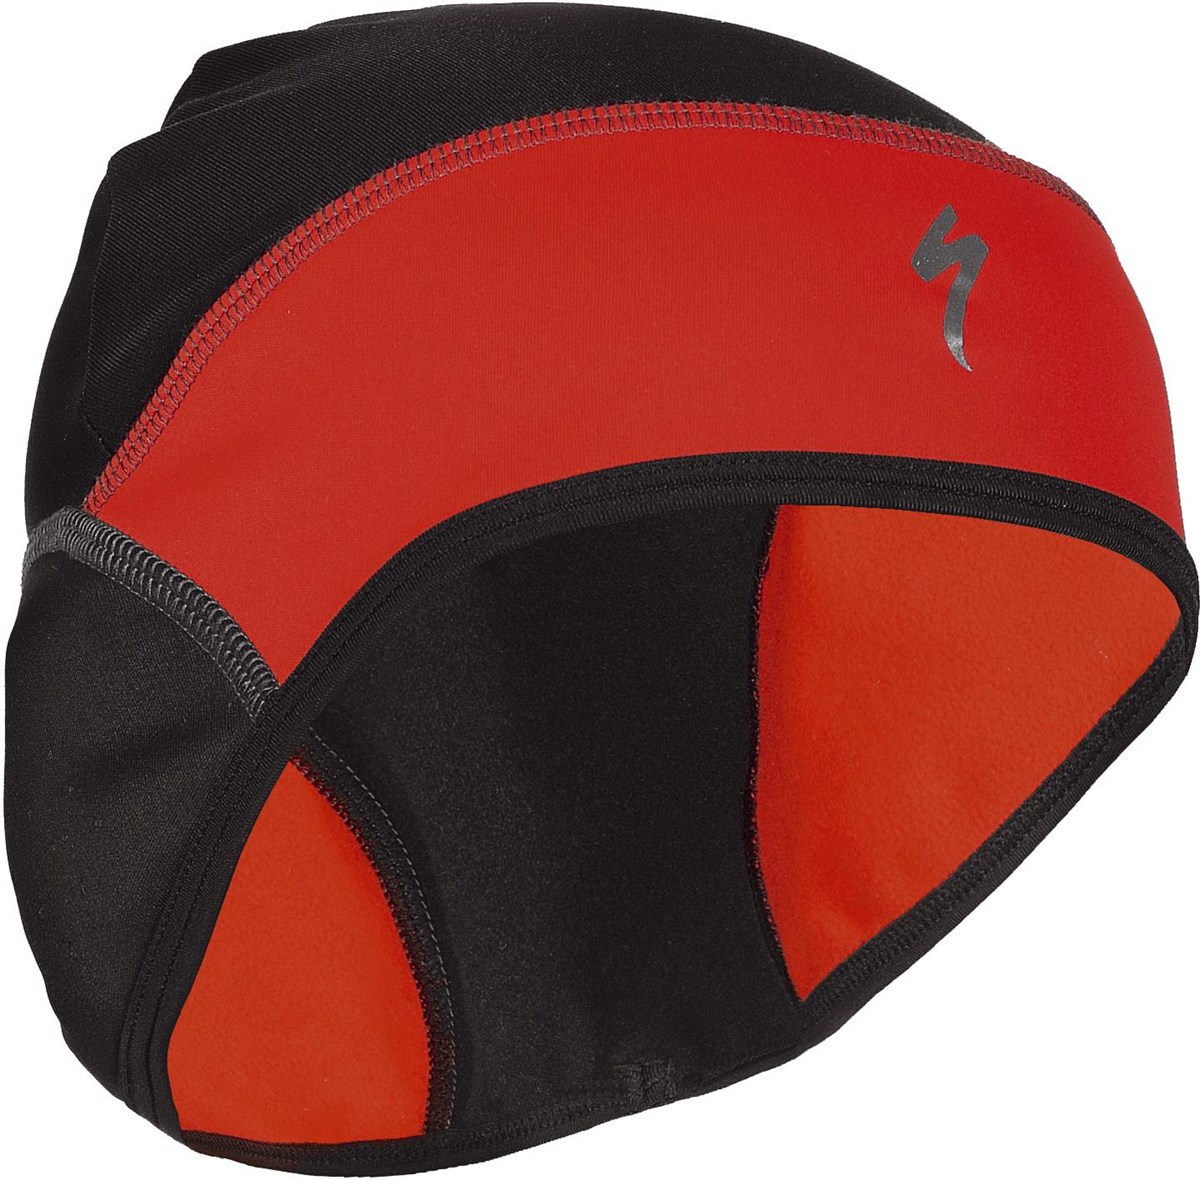 Specialized Headwarmer Gore WS SS17 product image